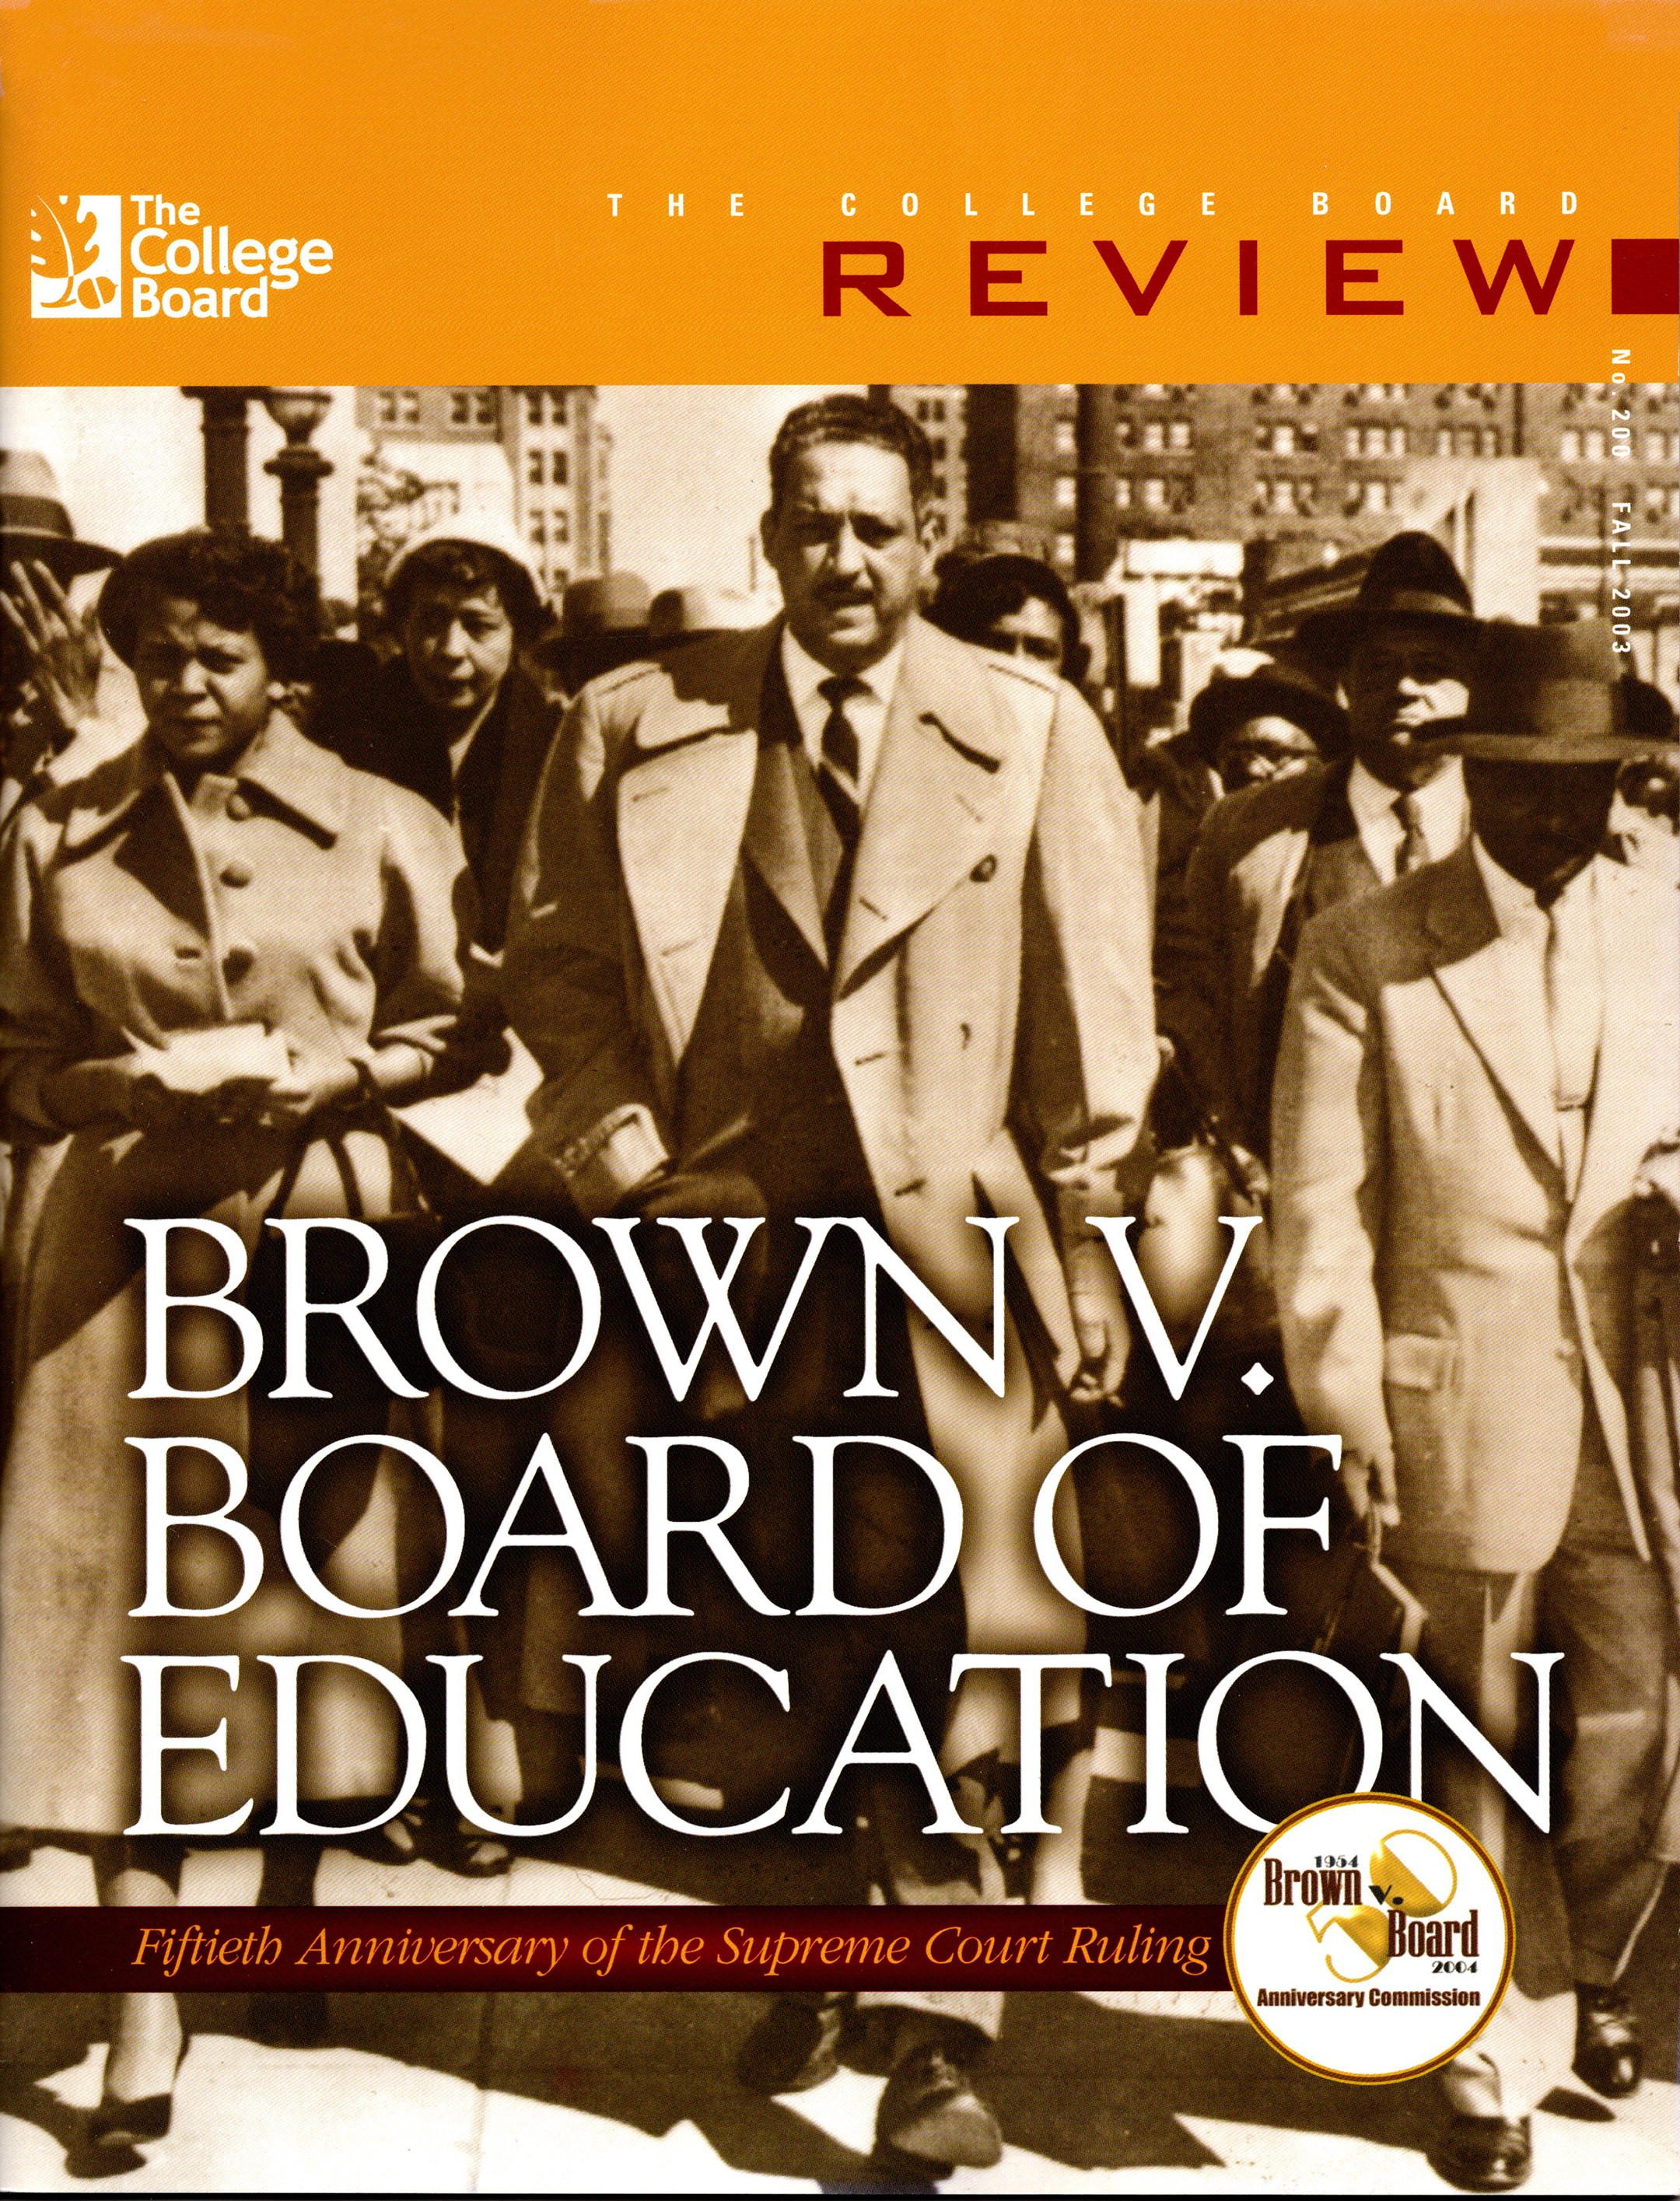 Cover of the fall 2003 issue of the college board review magazine dedicated to the brown v. Board of education decision